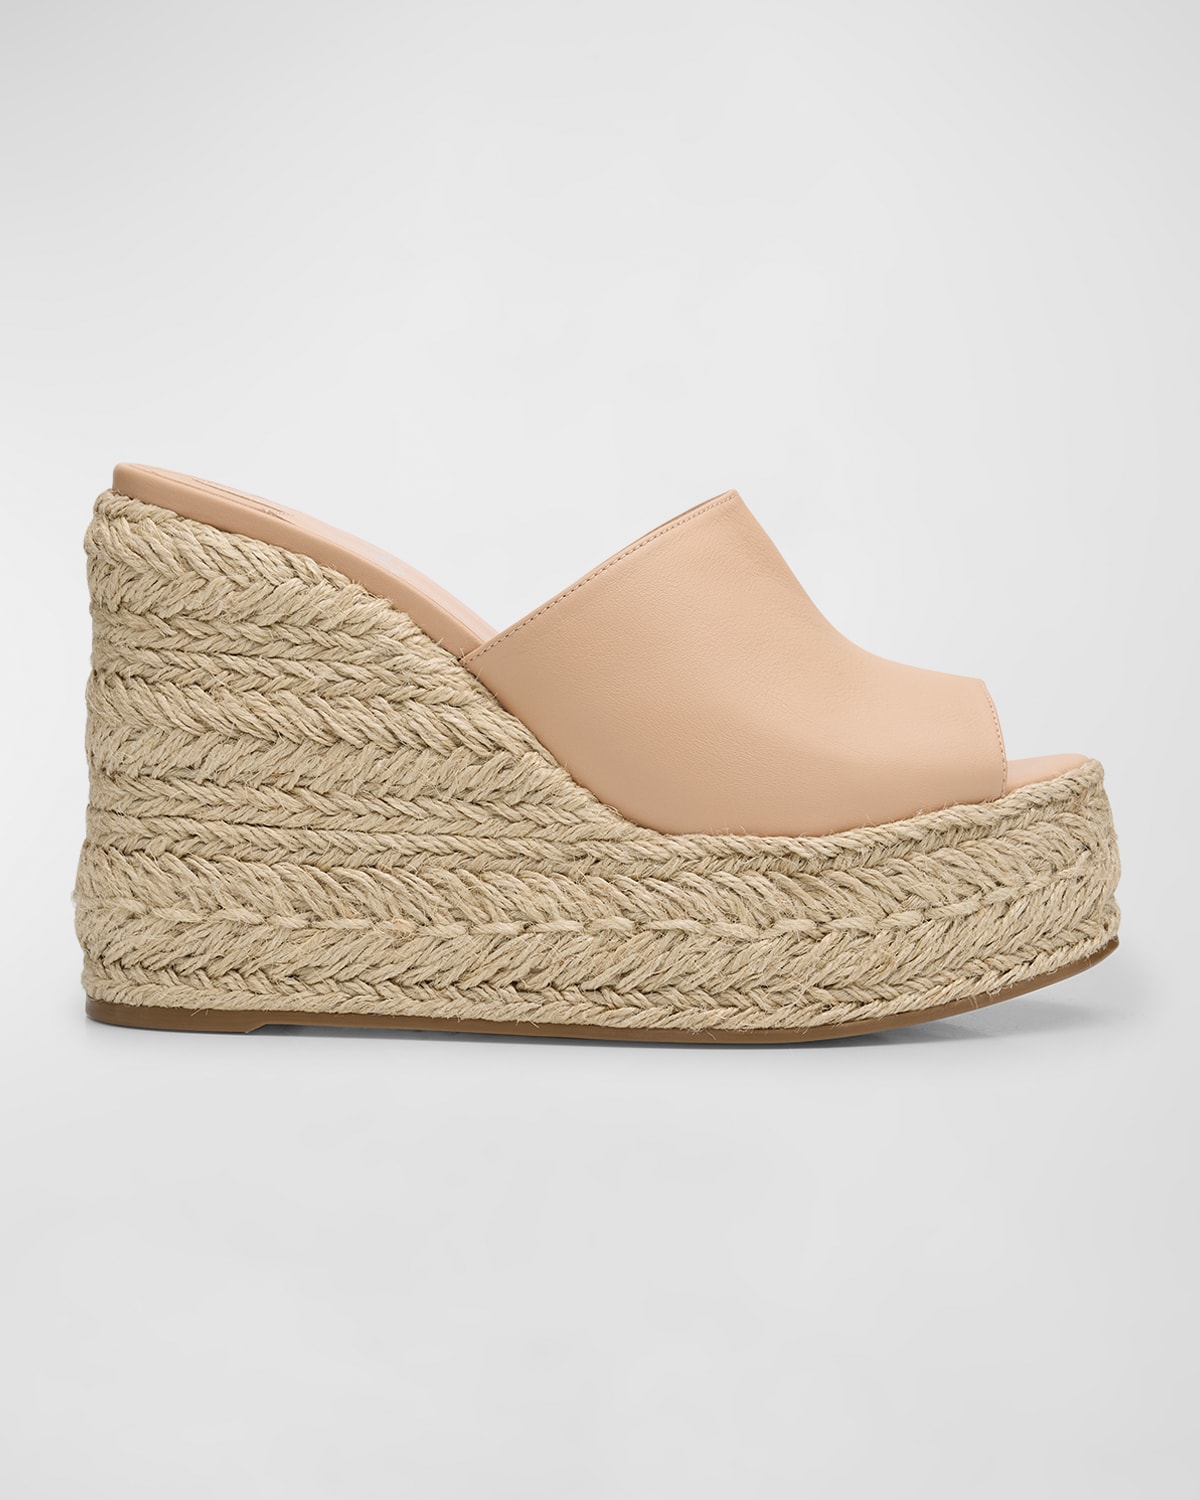 CHRISTIAN LOUBOUTIN ARIELLA LEATHER RED SOLE WEDGE ESPADRILLES